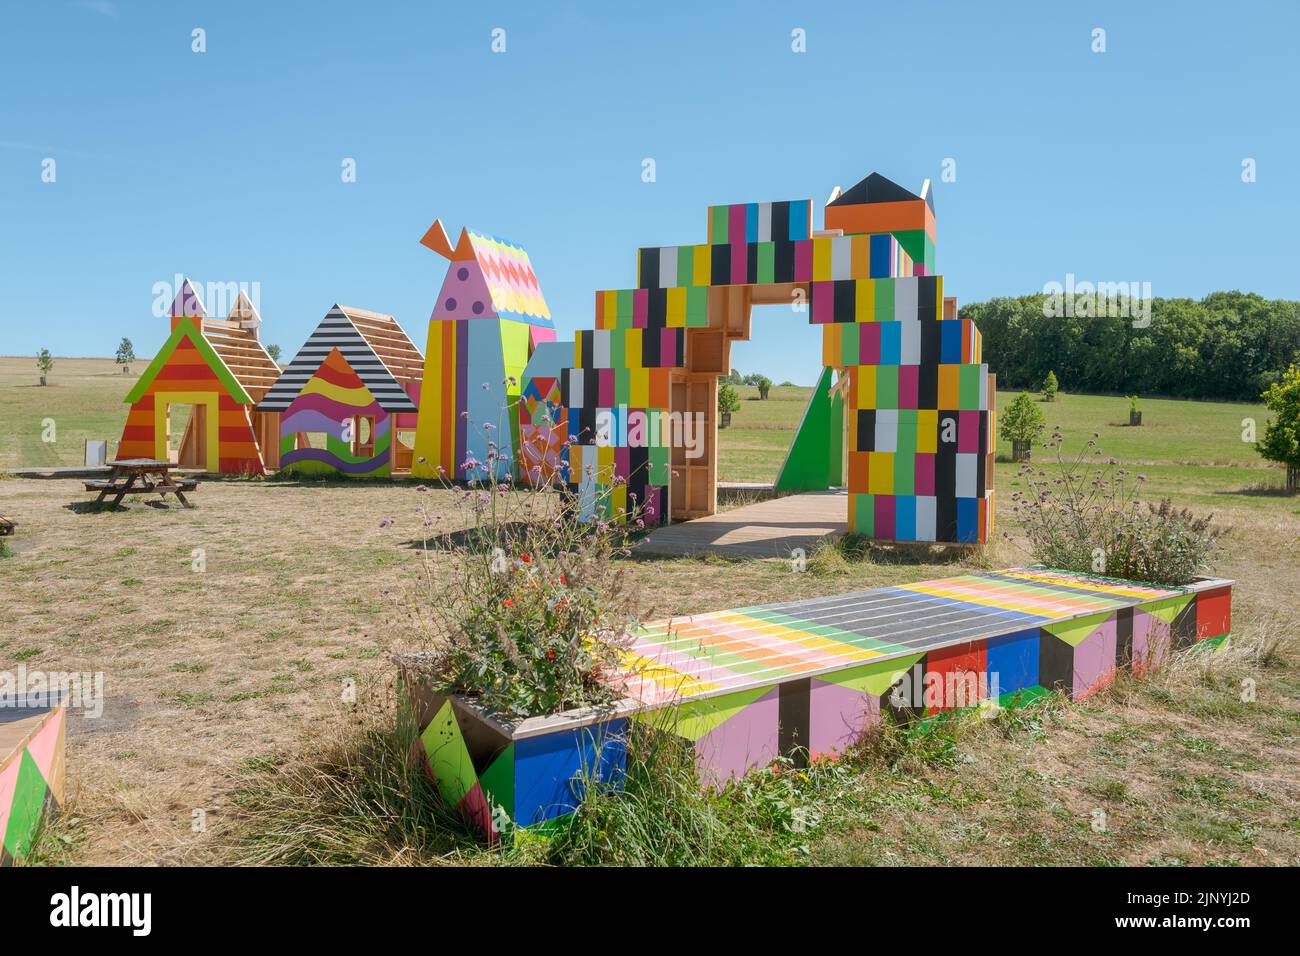 A site specific art installation by artist Morag Myerscough at Compton Verney, Warwickshire, UK. Stock Photo